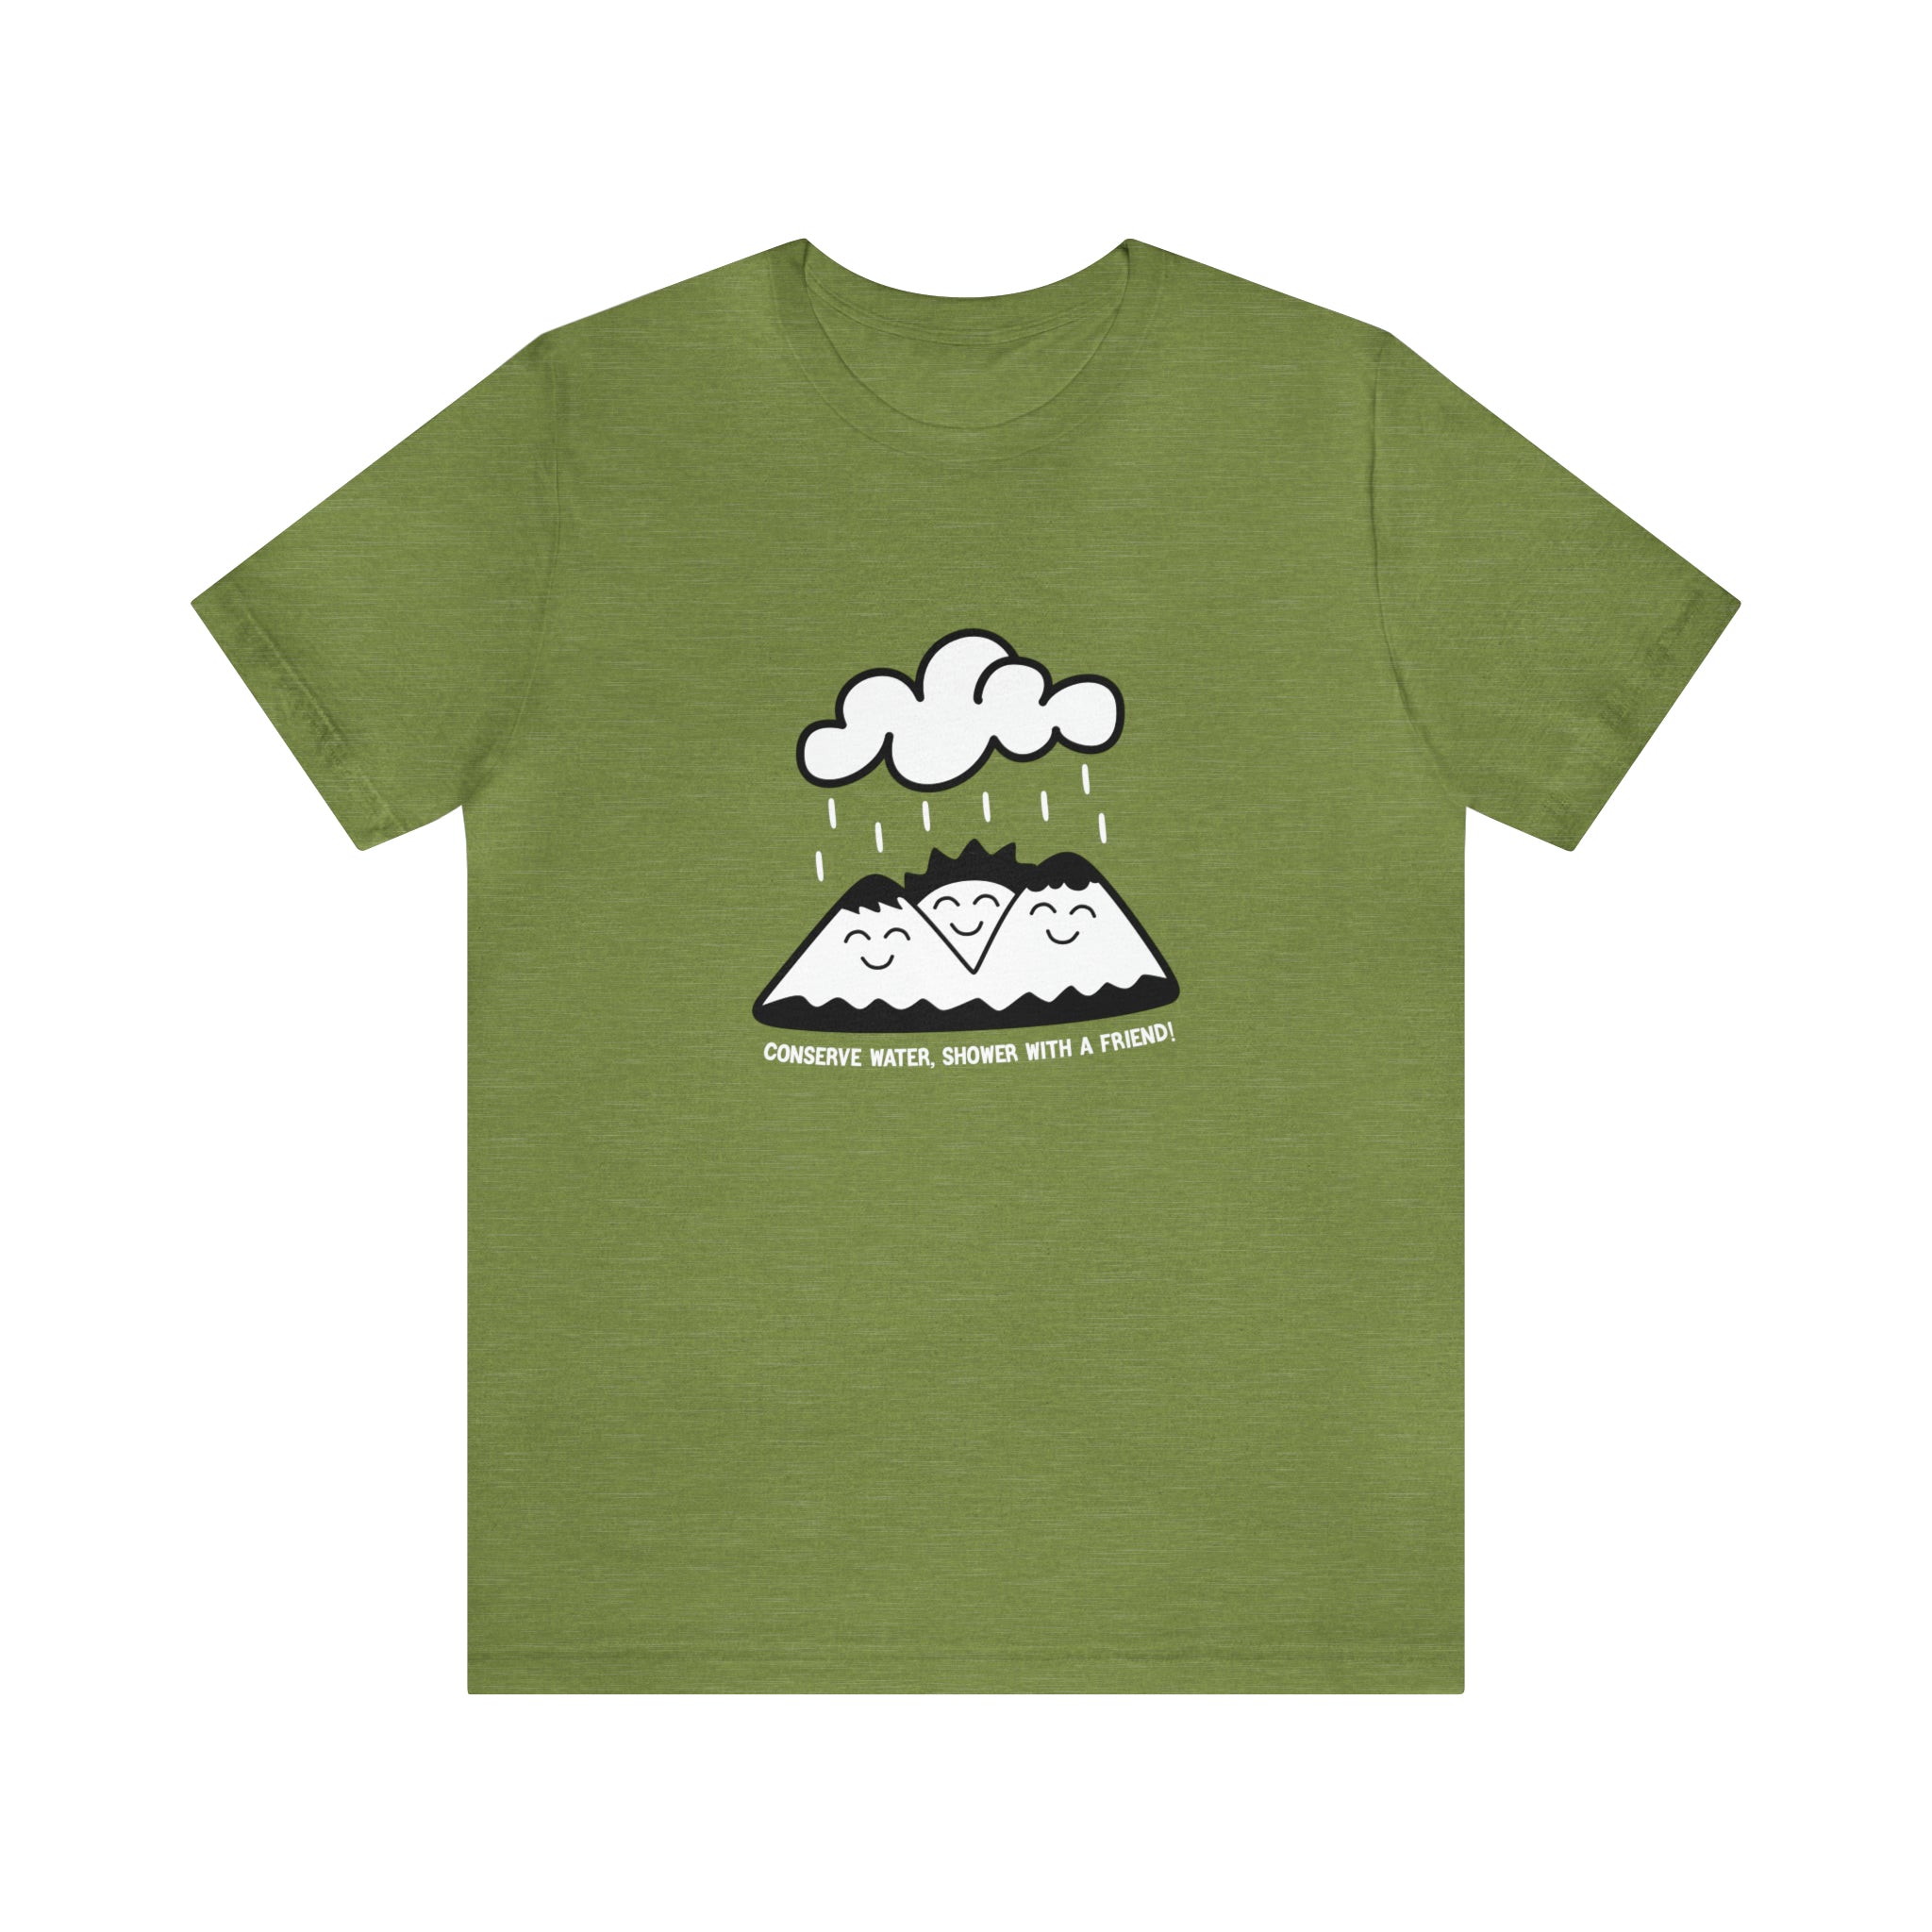 A Conserve Water Shower with a Friend T-shirt with a cloud design.